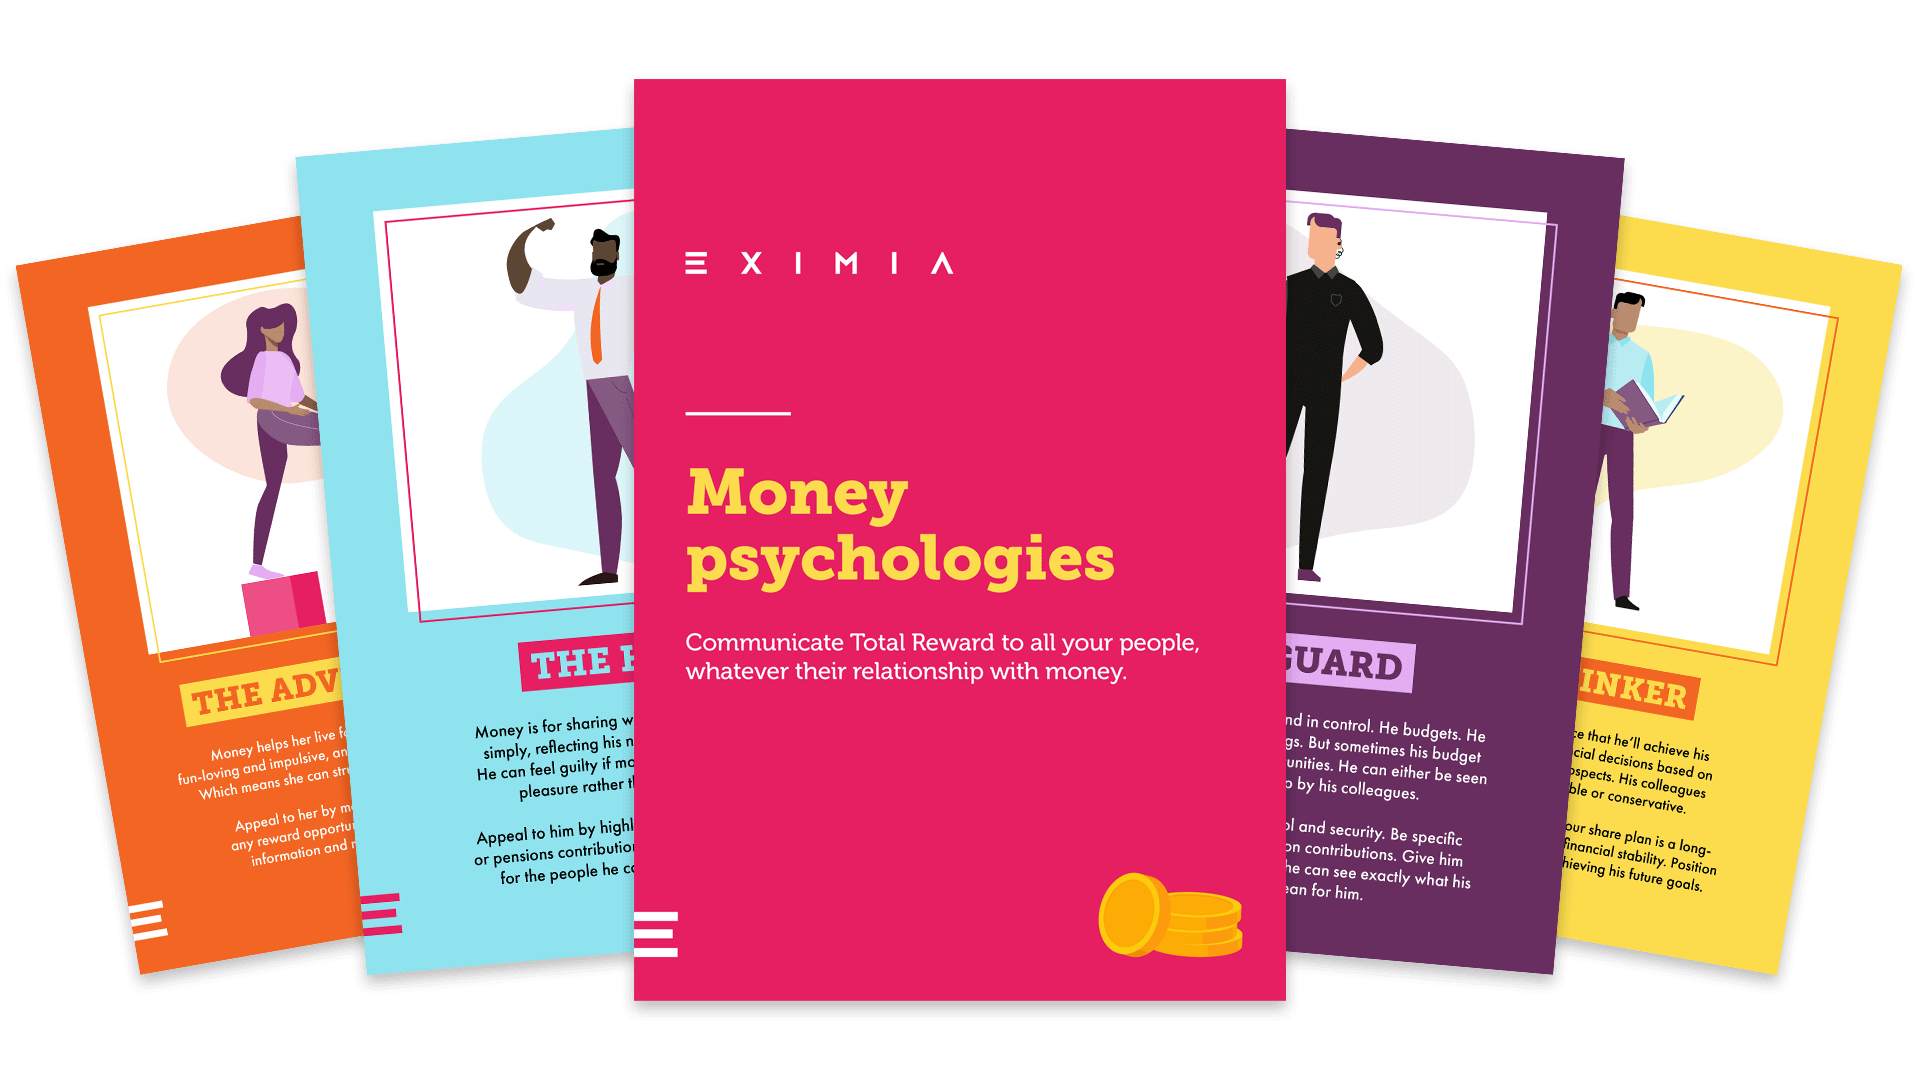 Download our Money Psychologies guide